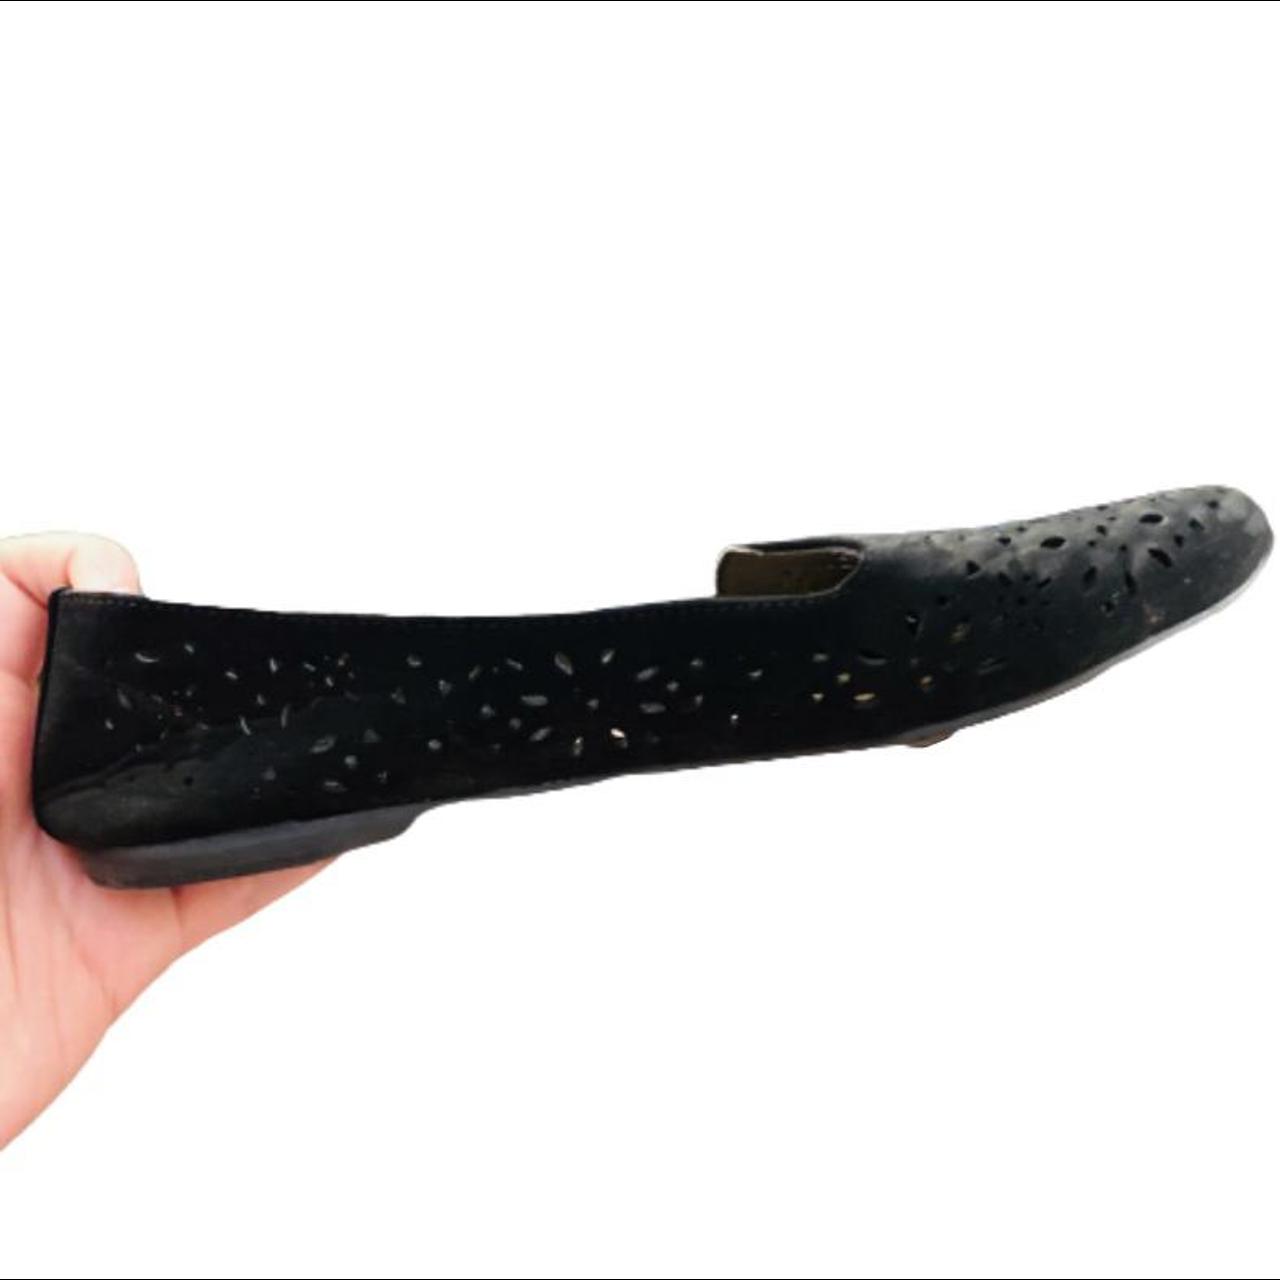 Product Image 1 - Black women’s loafers

- size 10